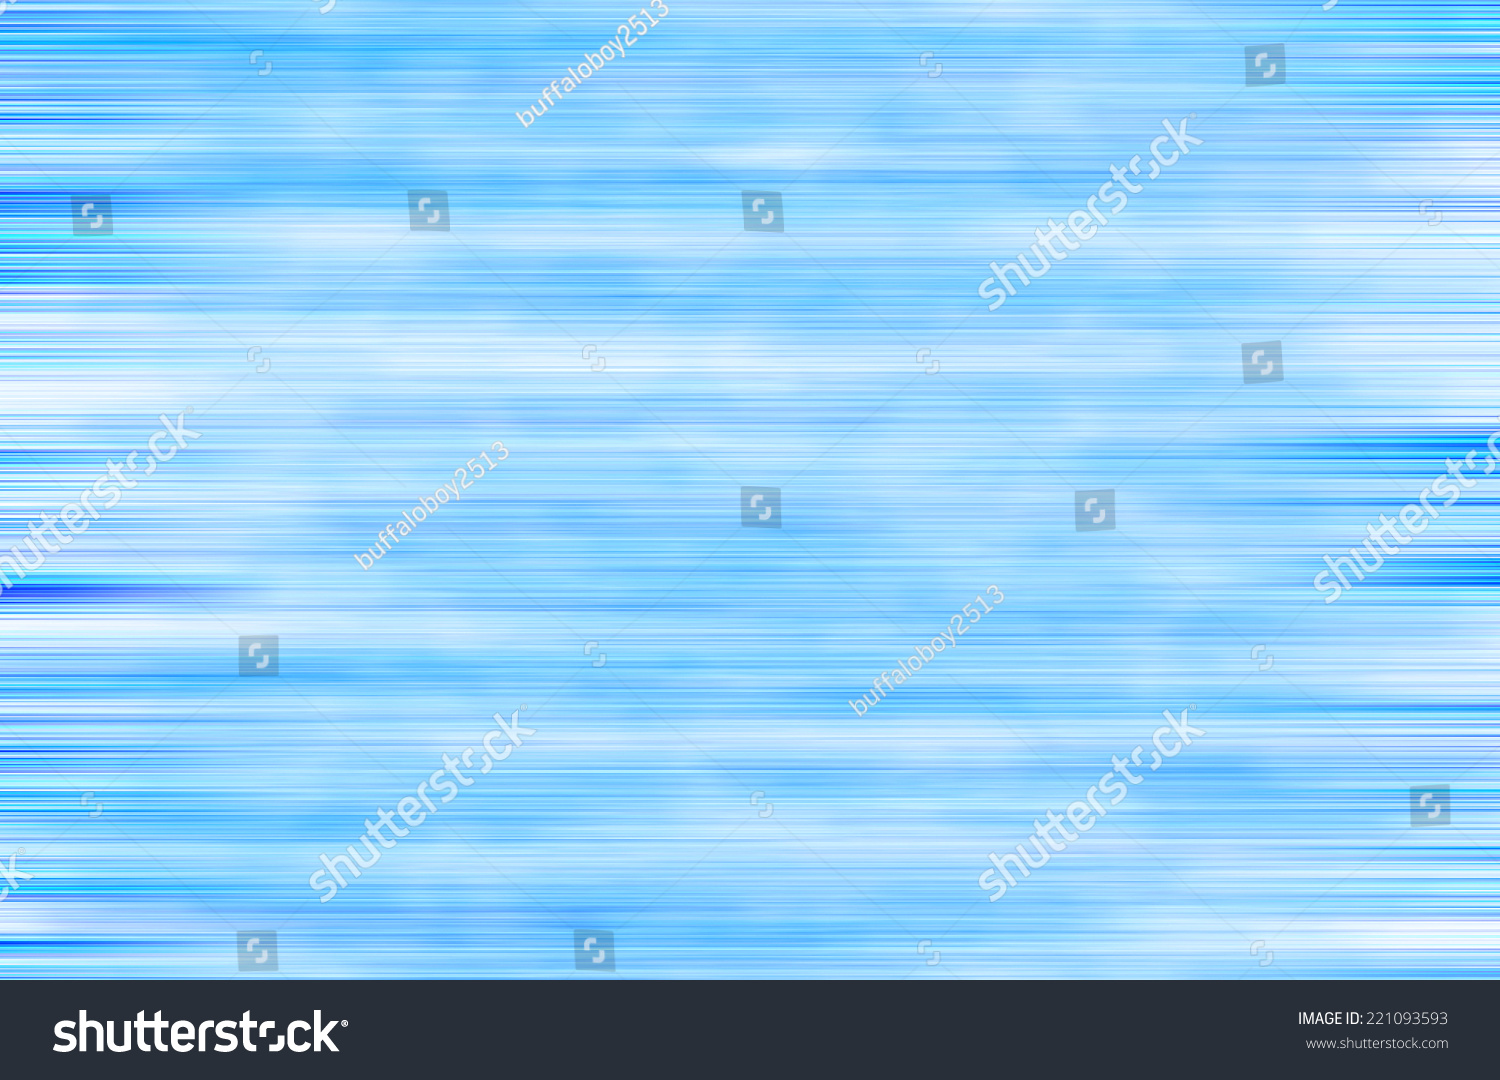 Abstract Blue Background With Motion Blur Stock Photo 221093593 ...